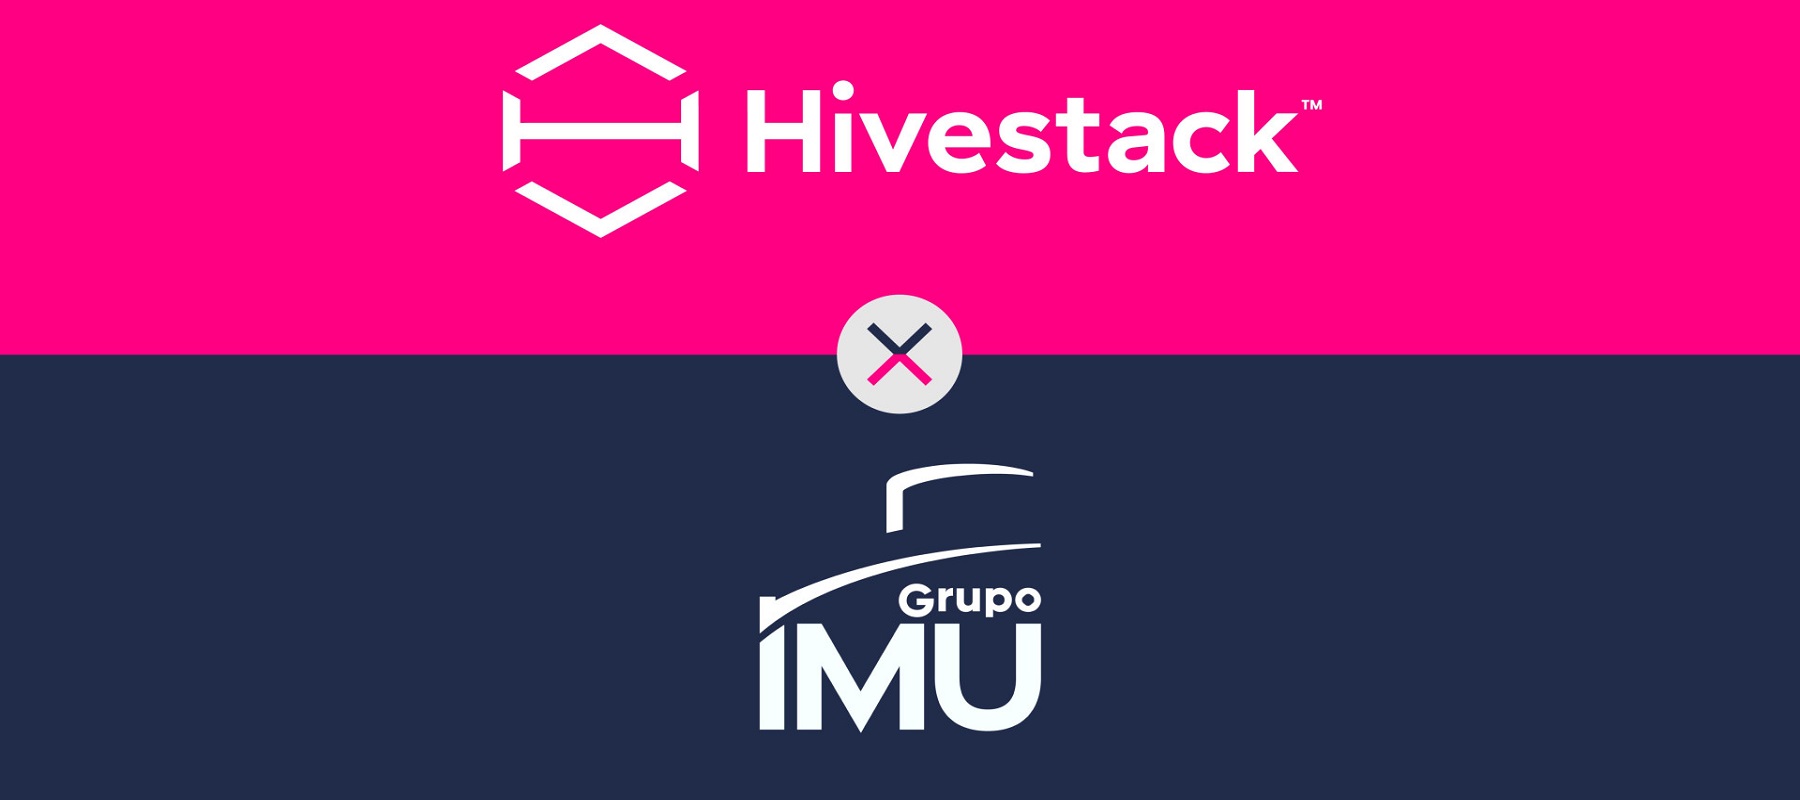 Grupo IMU appoints Hivestack as its first supply side platform for programmatic digital out of home in Mexico